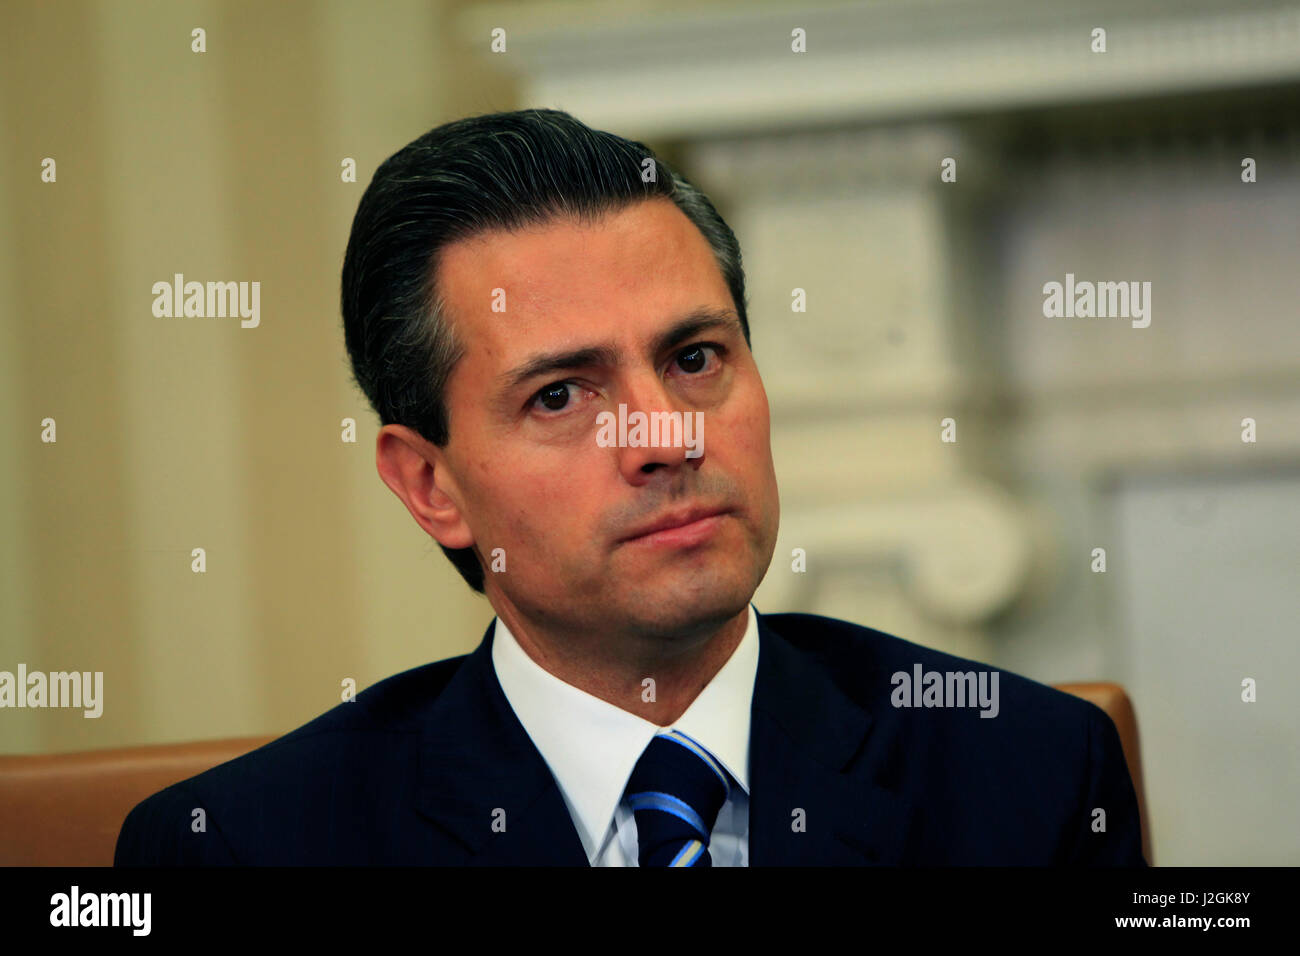 President Enrique Pena Nieto of Mexico in the Oval Office on January 6, 2015 Stock Photo